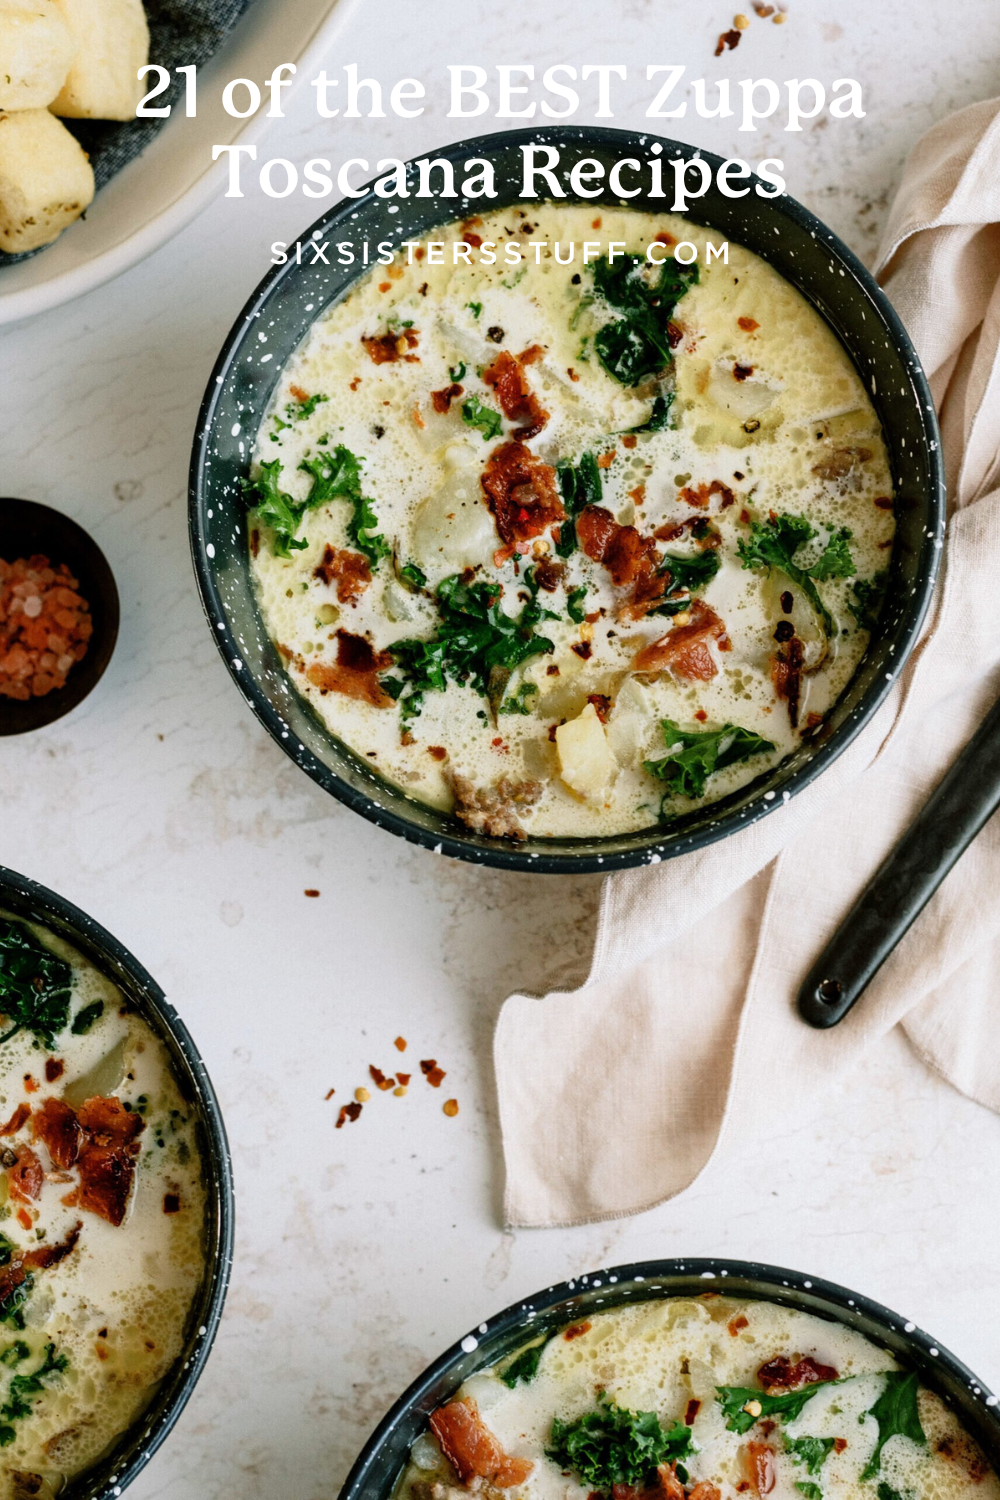 21 of the BEST Zuppa Toscana Recipes